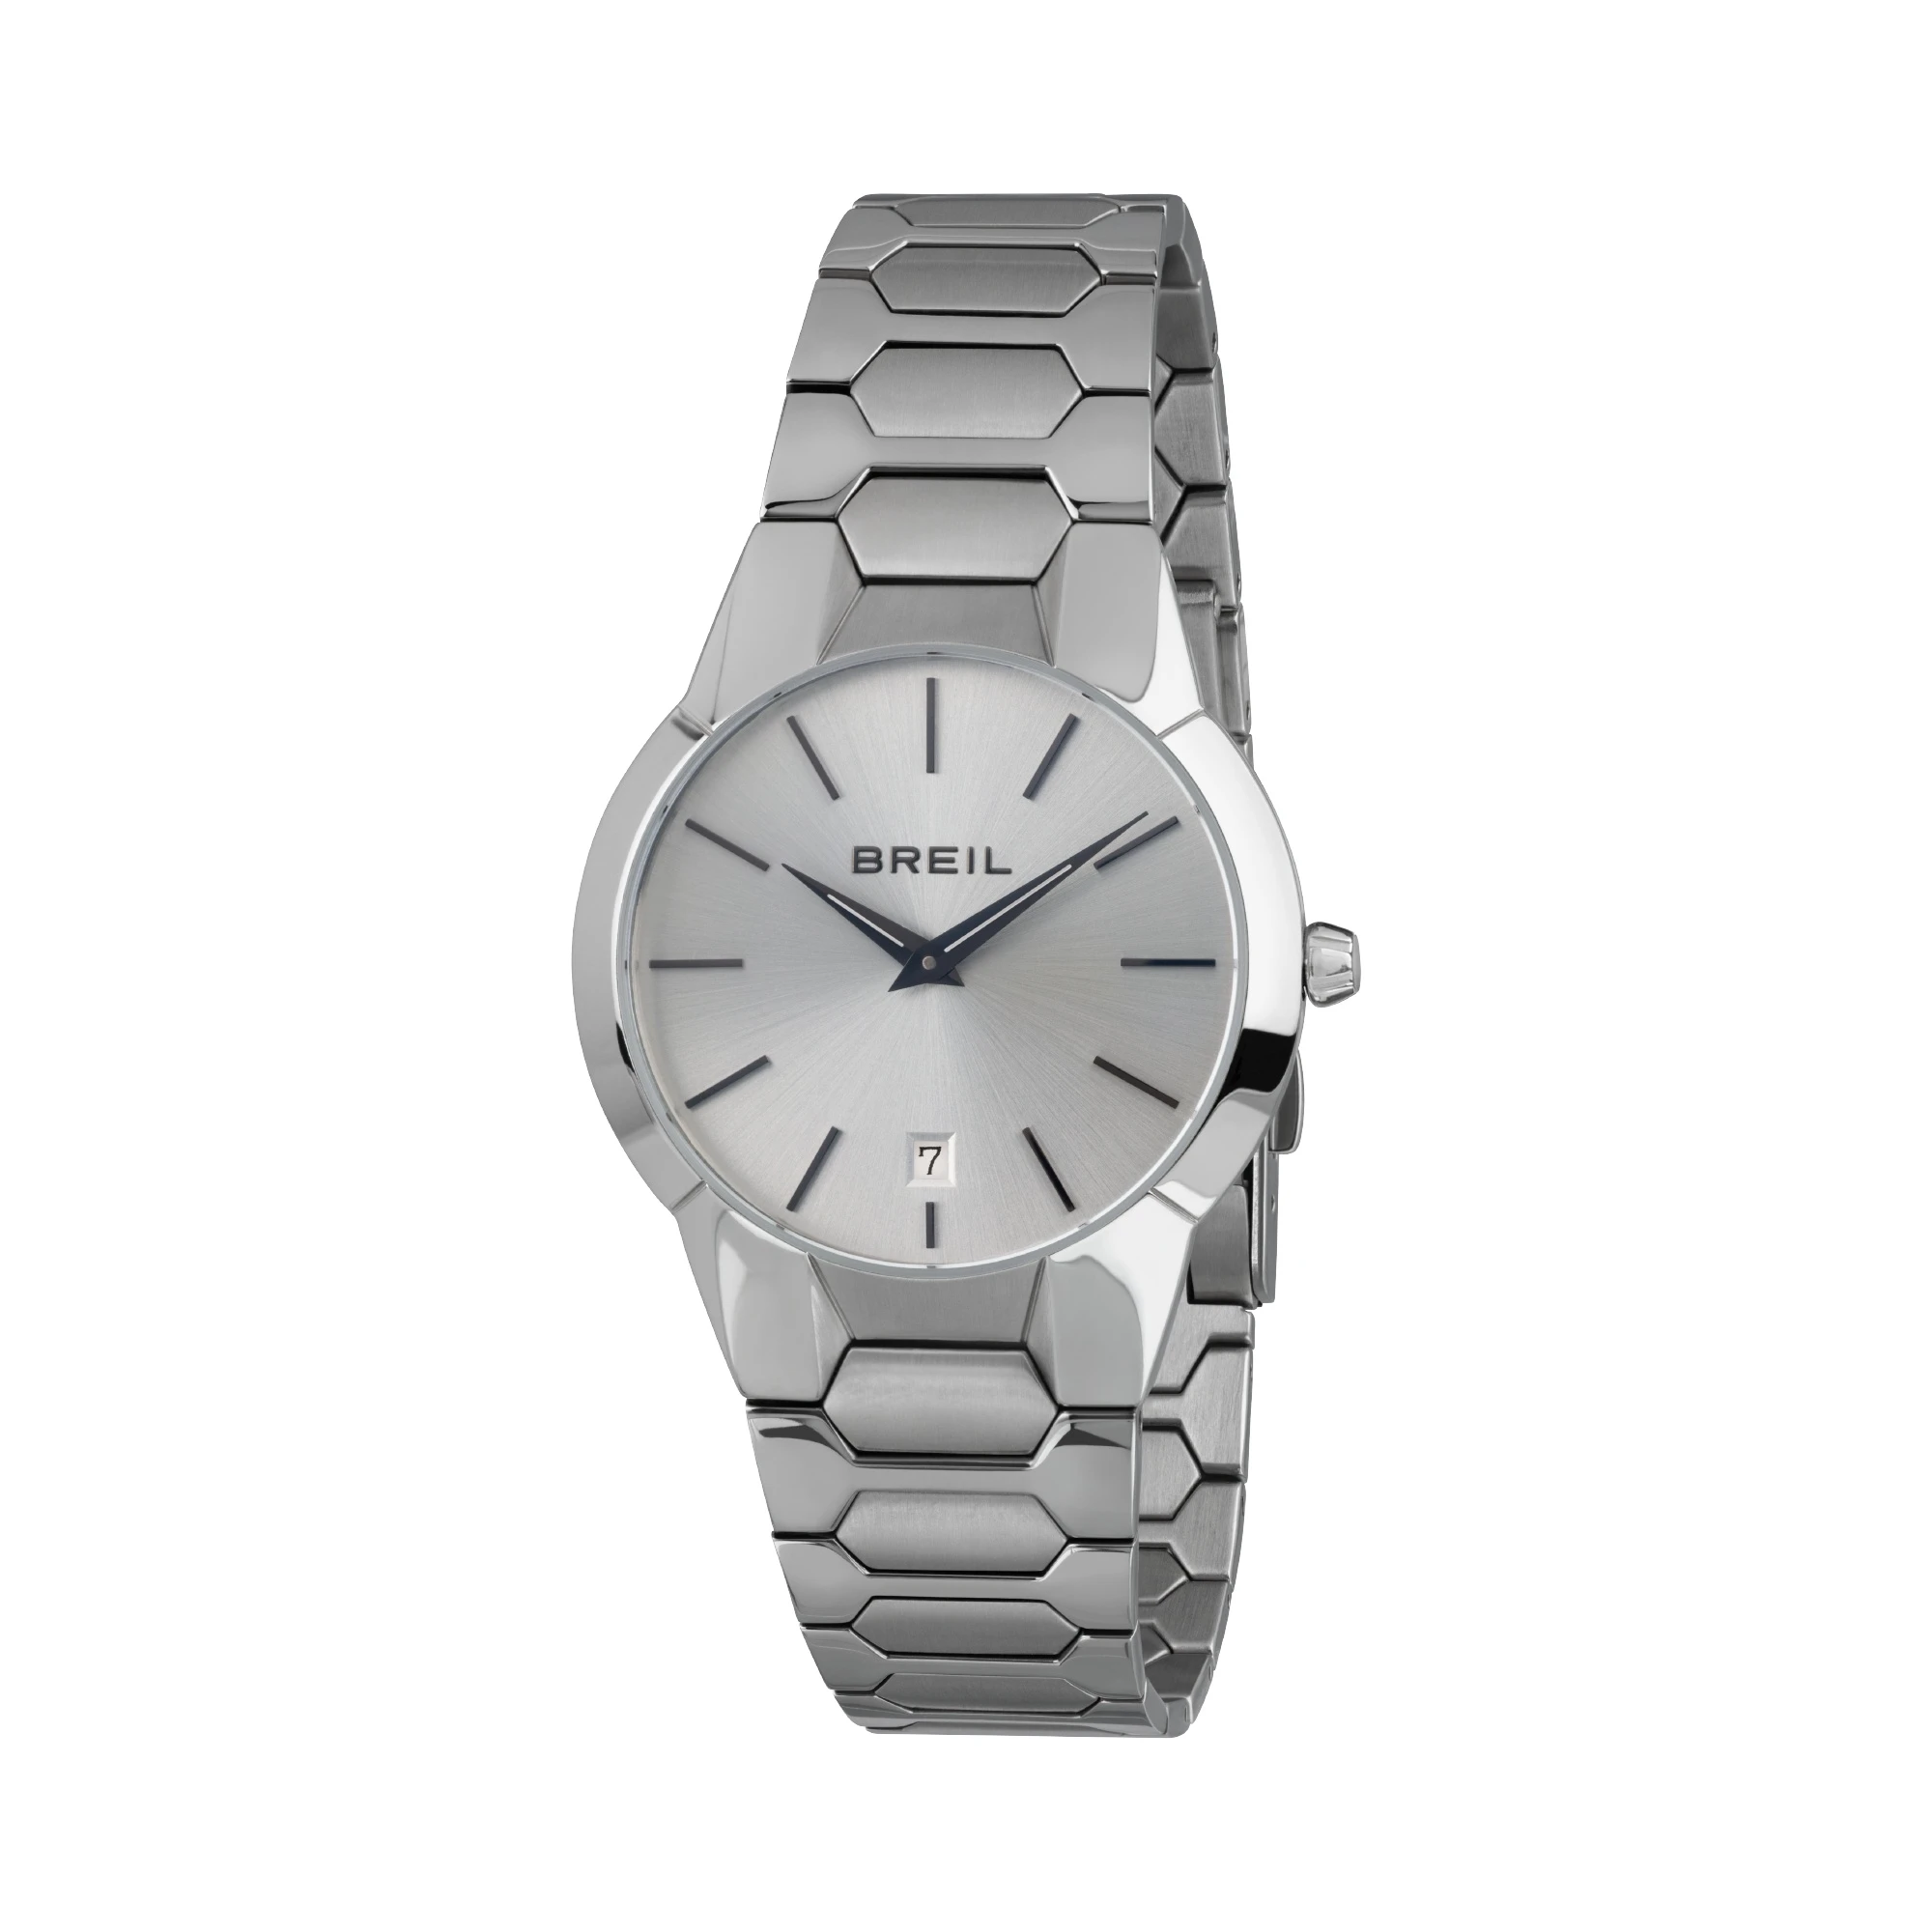 NEW ONE - SOLO TEMPO GENT 42 MM - 1 - TW1849 | Breil